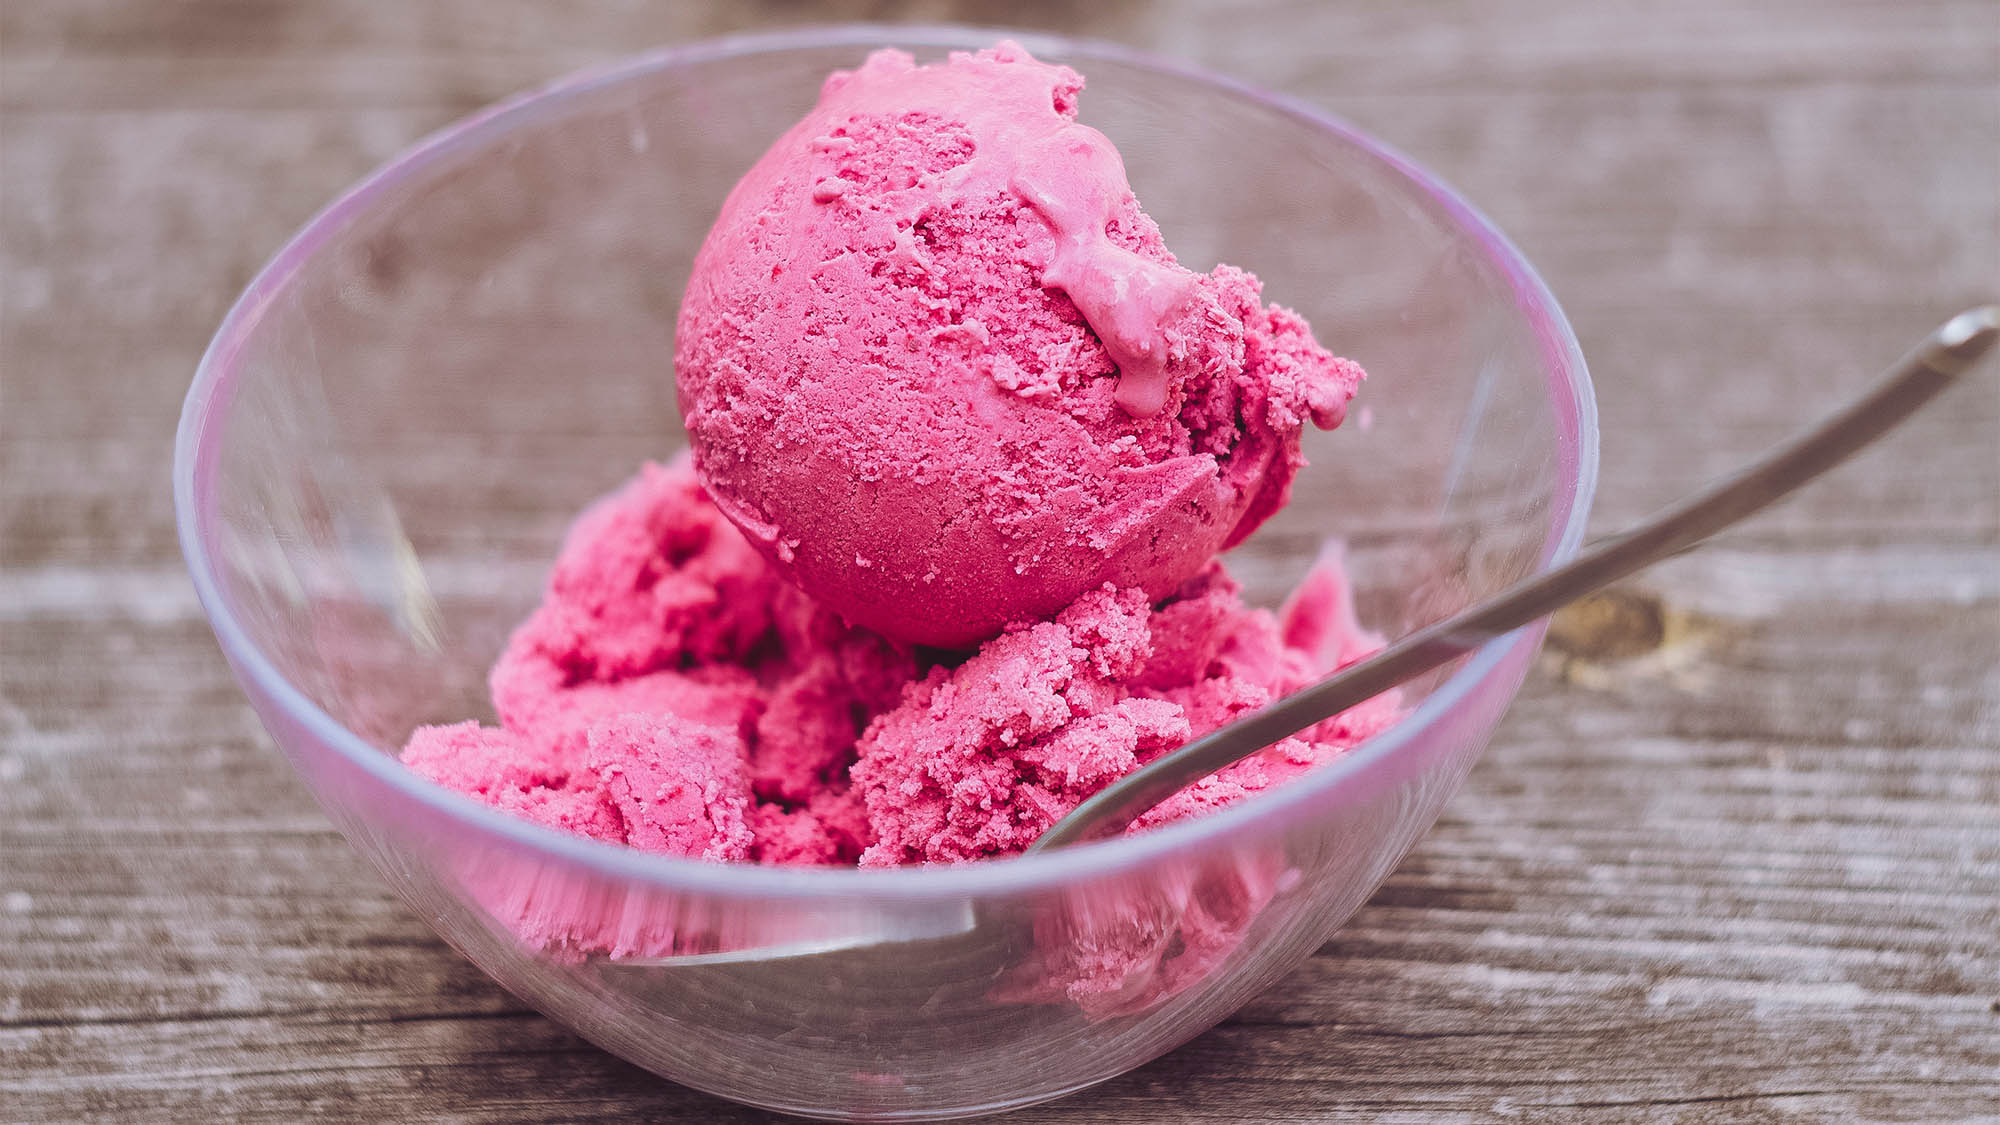 Clear glass dish of pink ice cream with spoon on top of wooden table